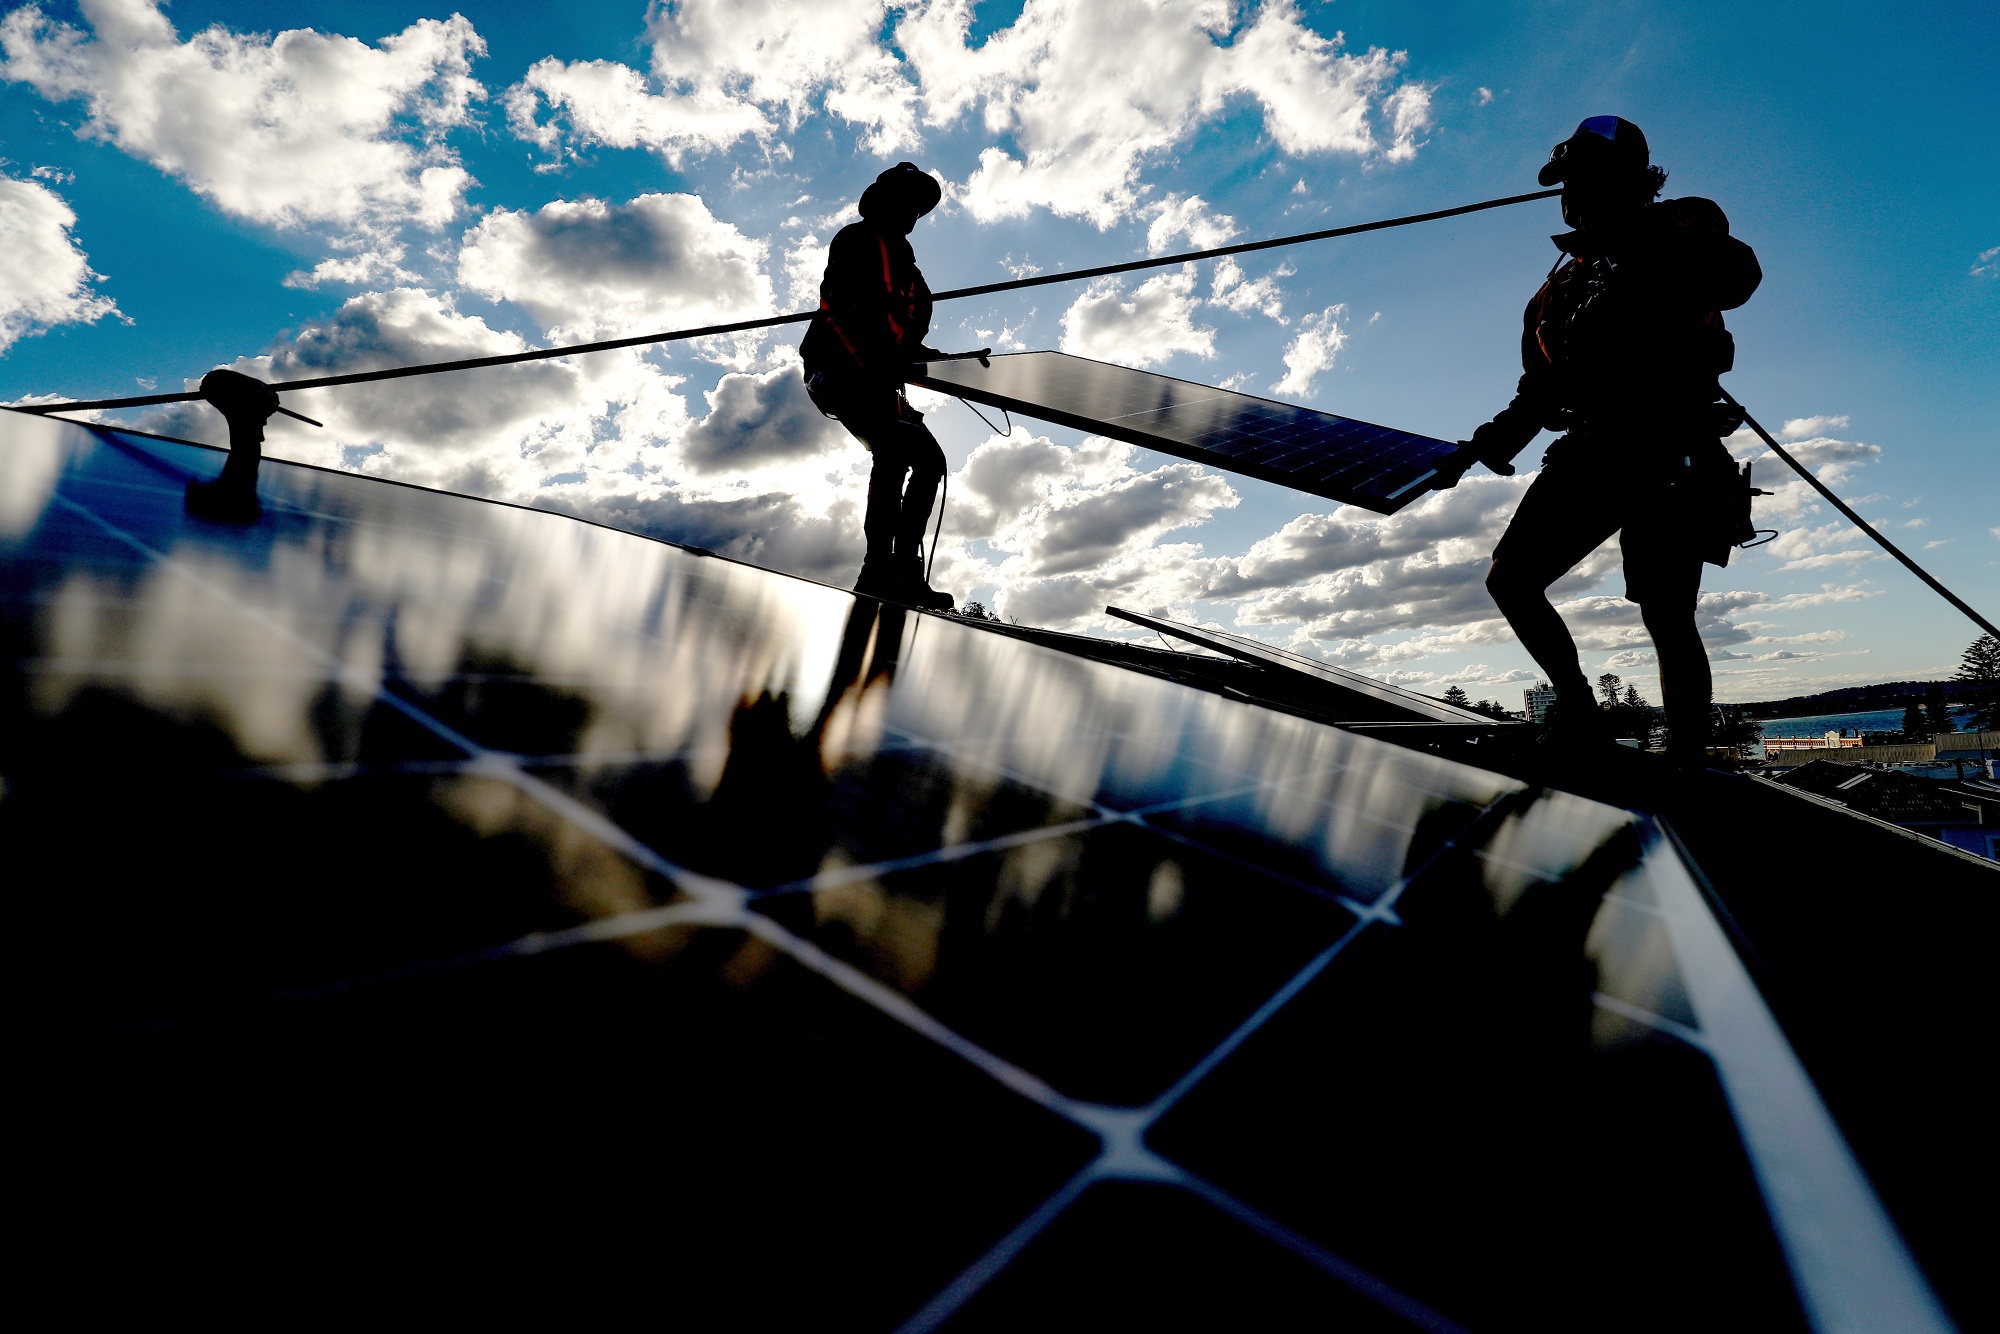 Solarpro employees install solar panels onto the rooftop of a residential property in Sydney, Australia.